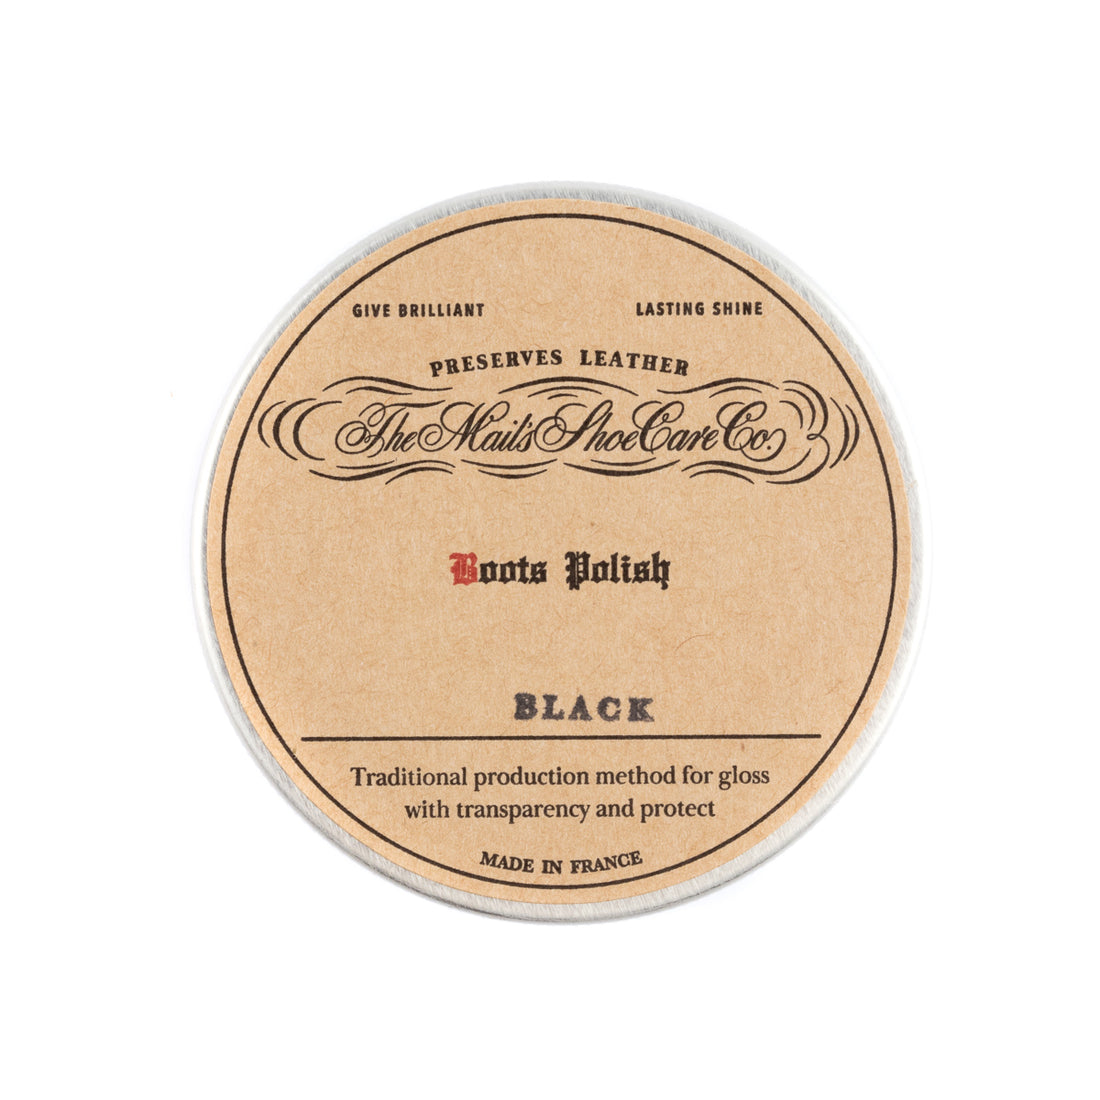 Clinch Boots The Mail's Shoe Care Co - Boots Polish - Black - Standard & Strange